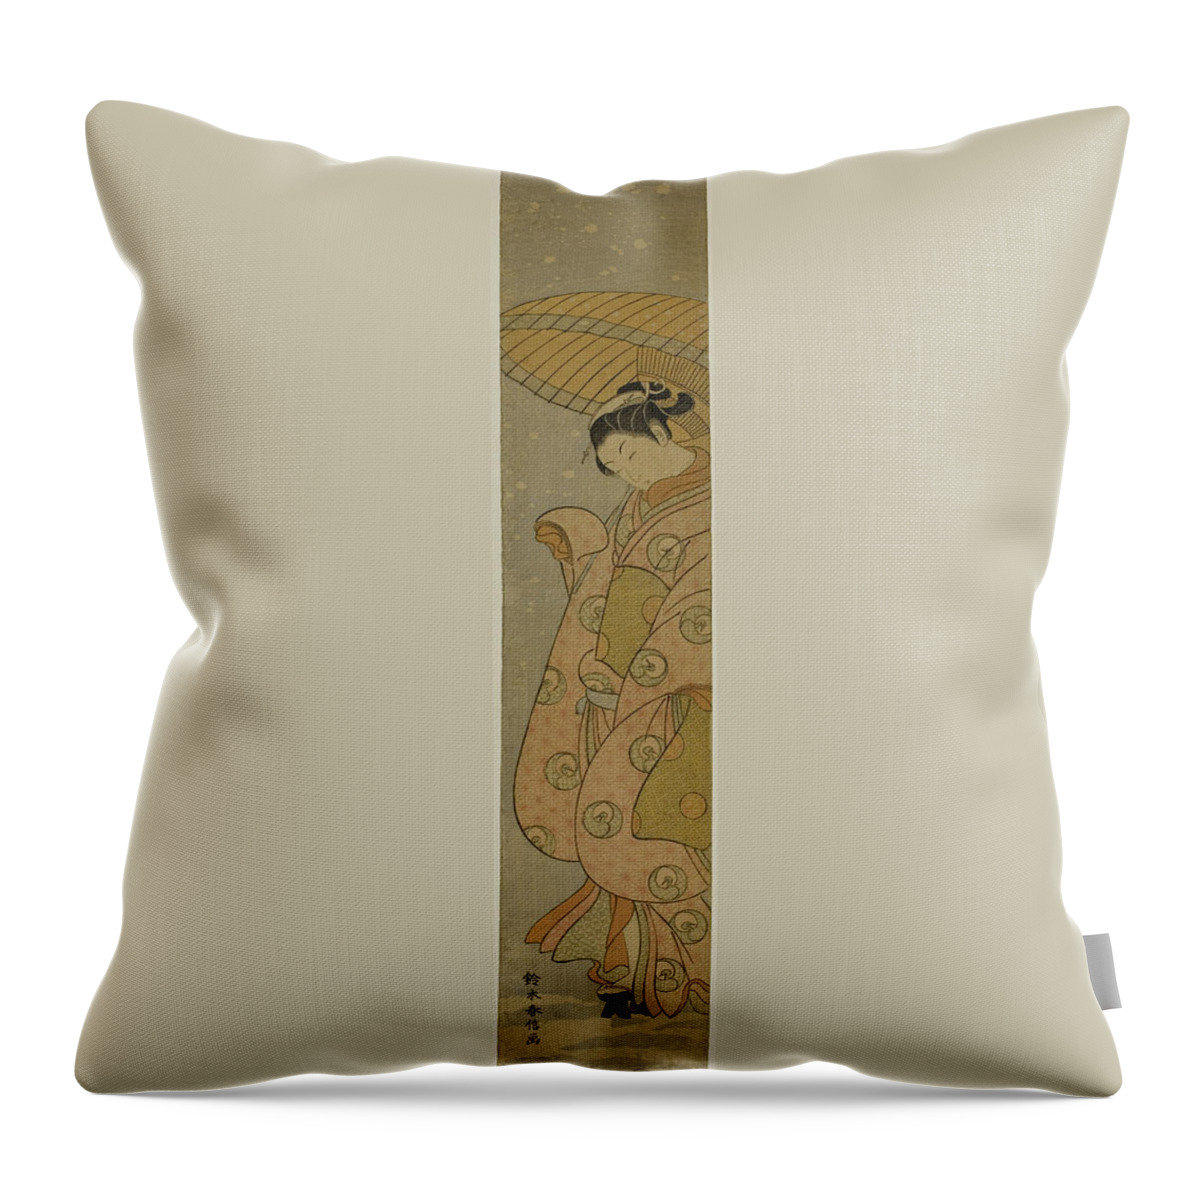 Beauty Under An Umbrella In The Snow C. 1770 Suzuki Harunobu Throw Pillow featuring the painting Beauty Under an Umbrella in the Snow c. 1770 Suzuki Harunobu by Artistic Rifki